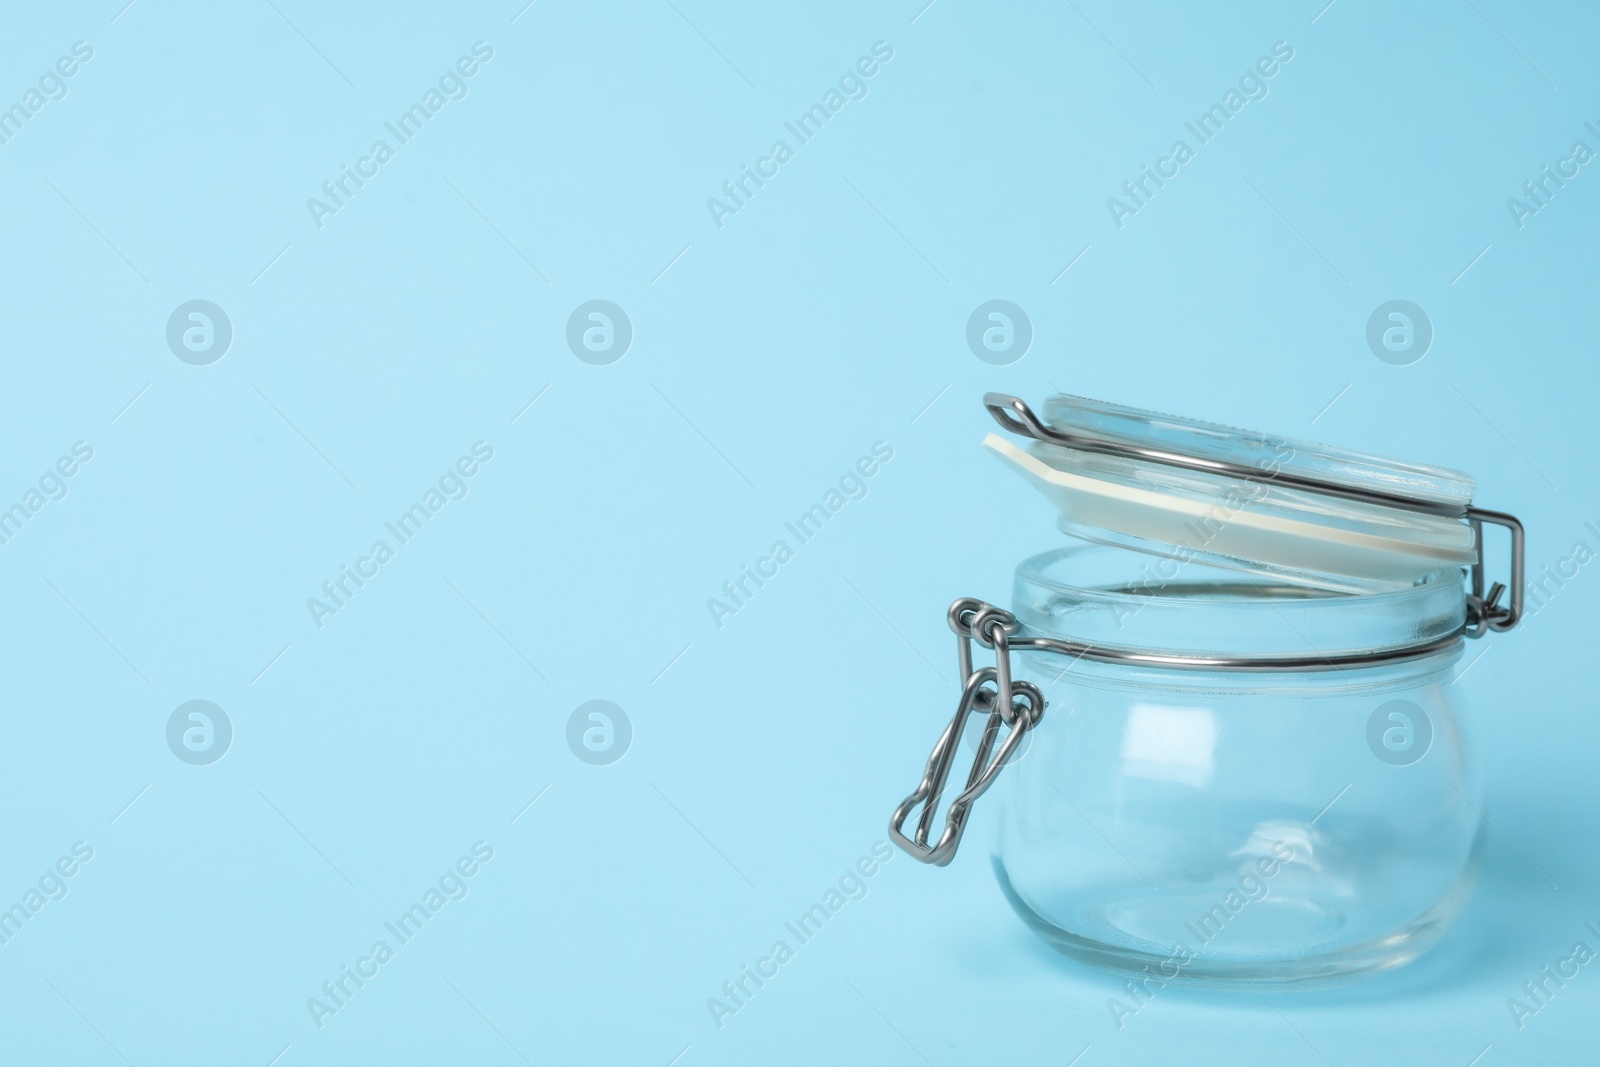 Photo of Open empty glass jar on light blue background, space for text